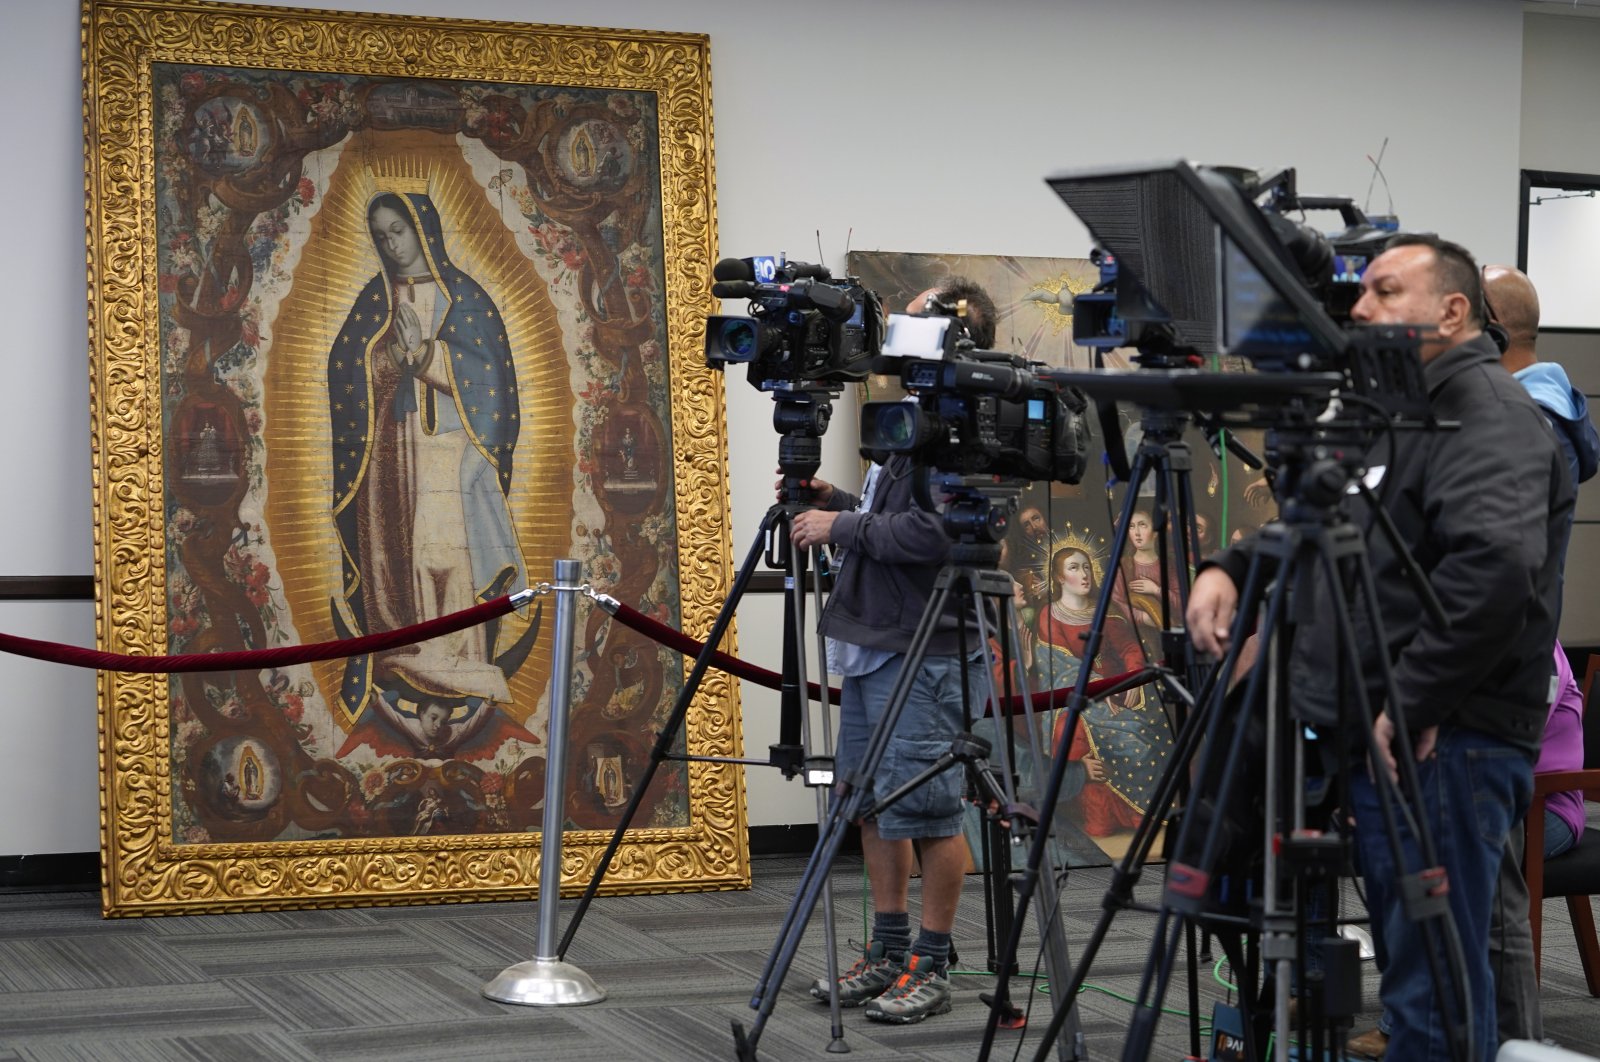 Members of the media attend a repatriation ceremony following investigations by the FBI&#039;s Art Crime Team at the FBI headquarters, &quot;The Virgin of Guadalupe&quot; painting (L), Los Angeles, U.S, April 22, 2022. (AP Photo)